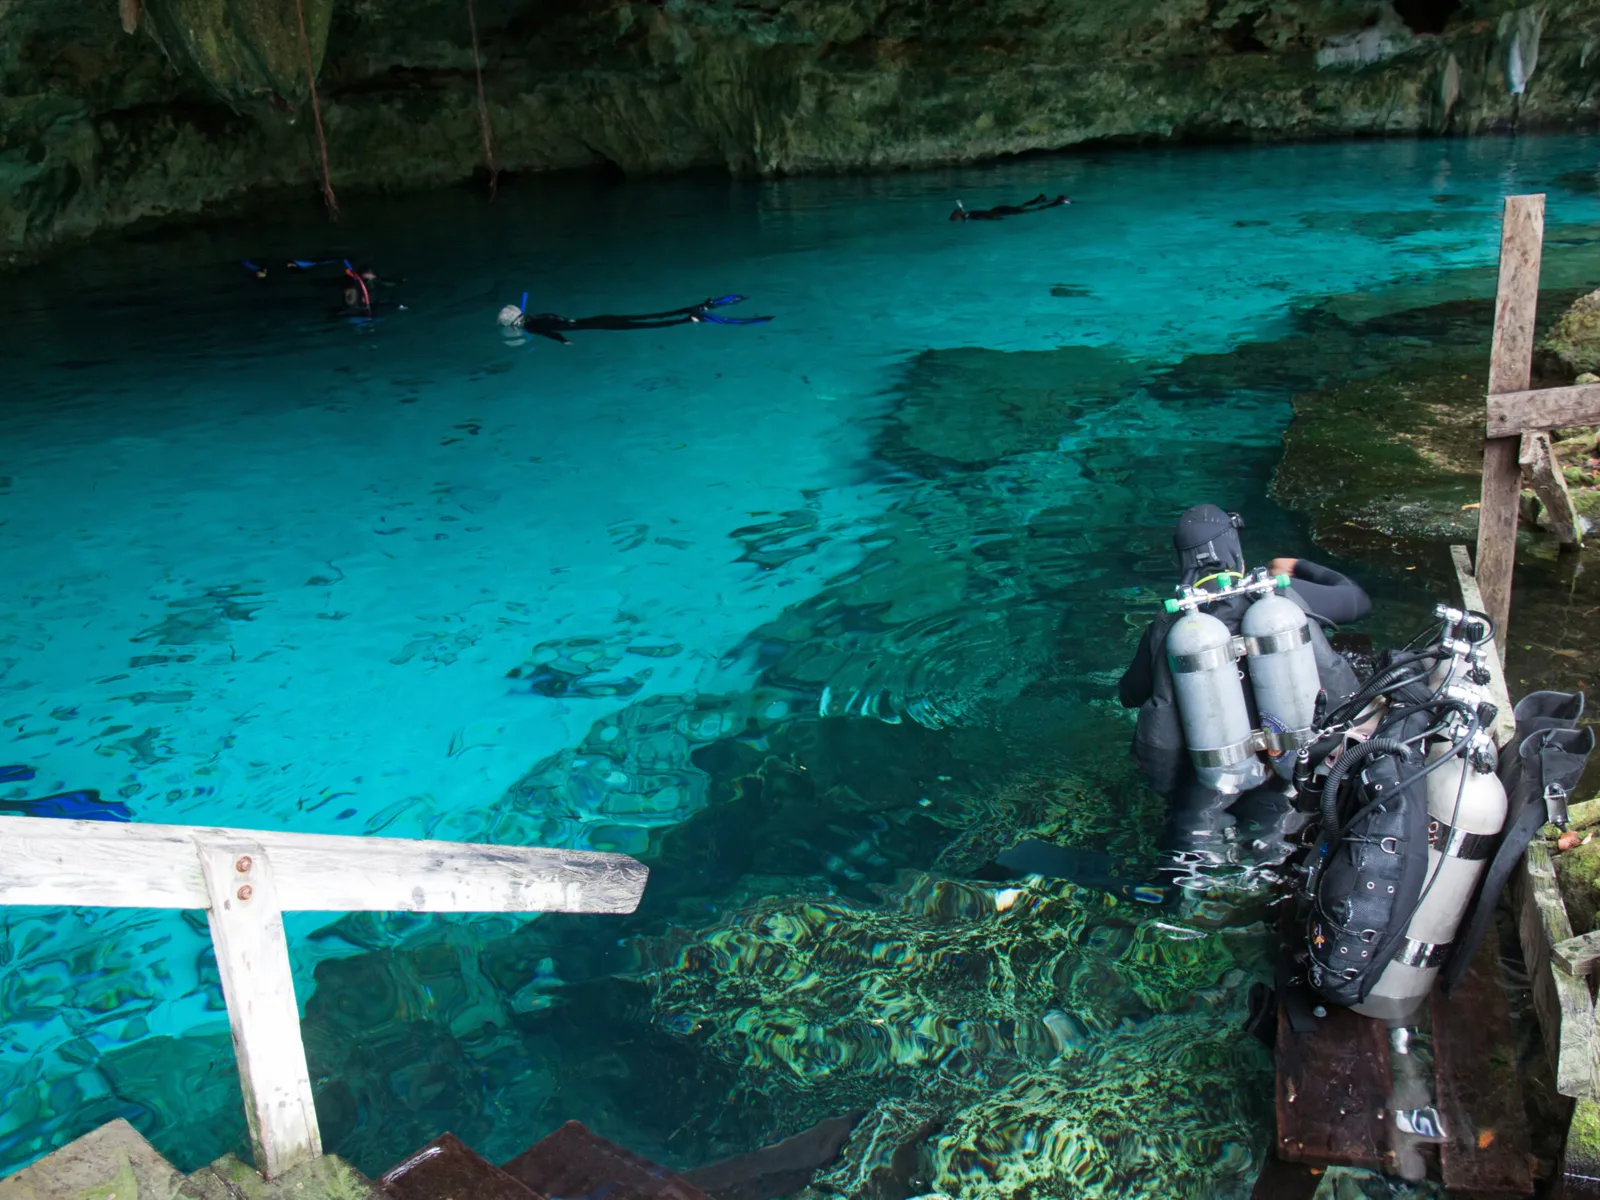 Cenote Angelita, one of the best cenotes in Mexico, with divers and snorkelers in the water